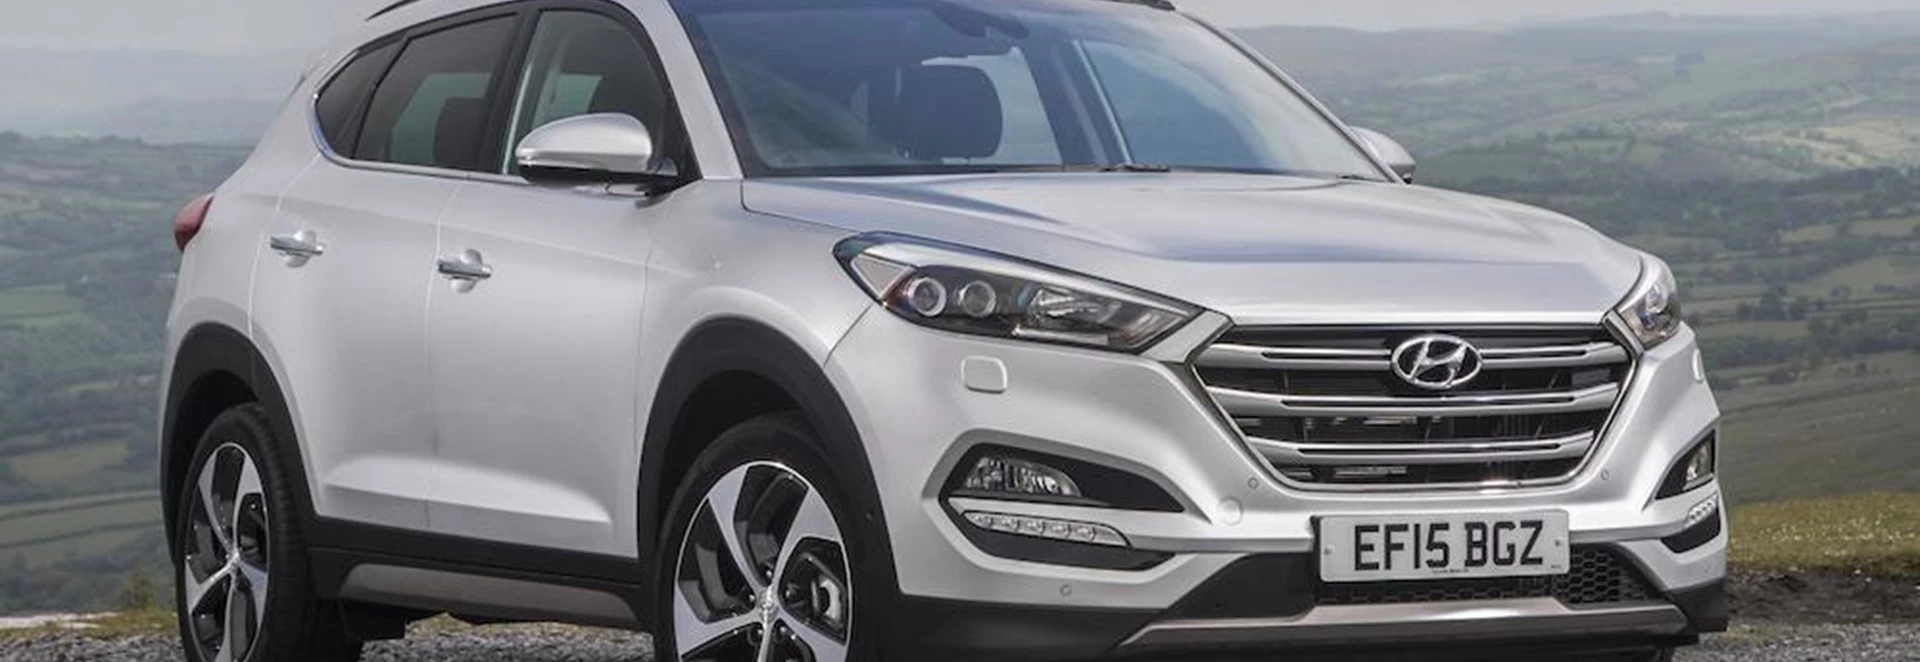 Full specs and pricing announced for new Hyundai Tucson